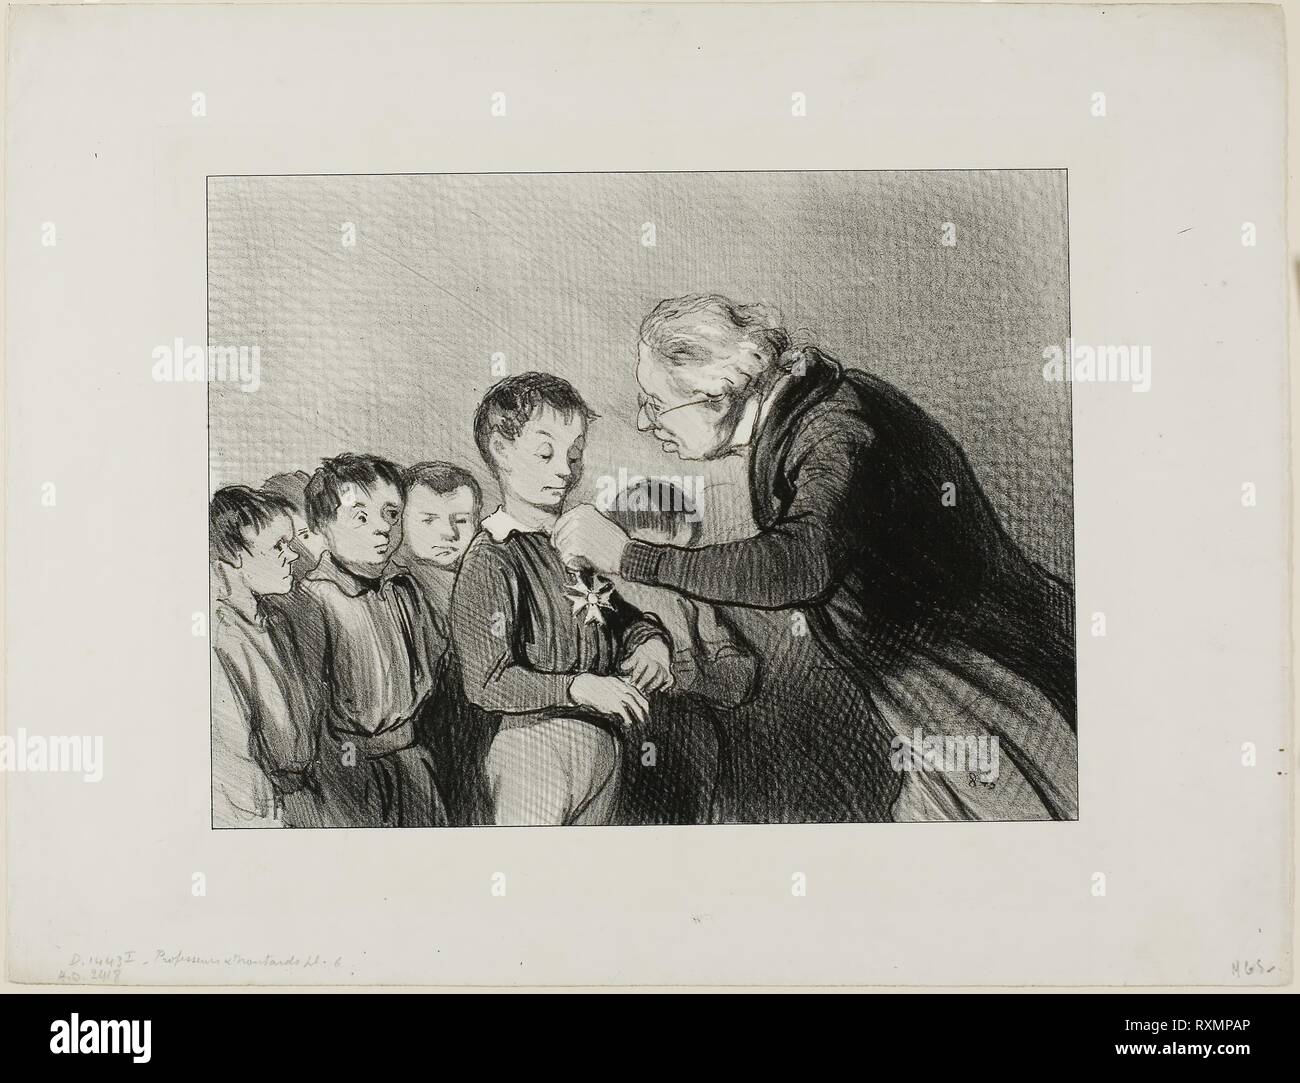 '- Mr. Alfred Cabassol! You are the only one in the class who succeeded to get through the entire week without blowing your nose into your sleeve. Please stand to receive this prize of honour for cleanliness,' plate 6 from Professeurs Et Moutards. Honoré Victorin Daumier; French, 1808-1879. Date: 1846. Dimensions: 182 × 242 mm (image); 275 × 357 mm (sheet). Lithograph in black on white wove paper. Origin: France. Museum: The Chicago Art Institute. Stock Photo